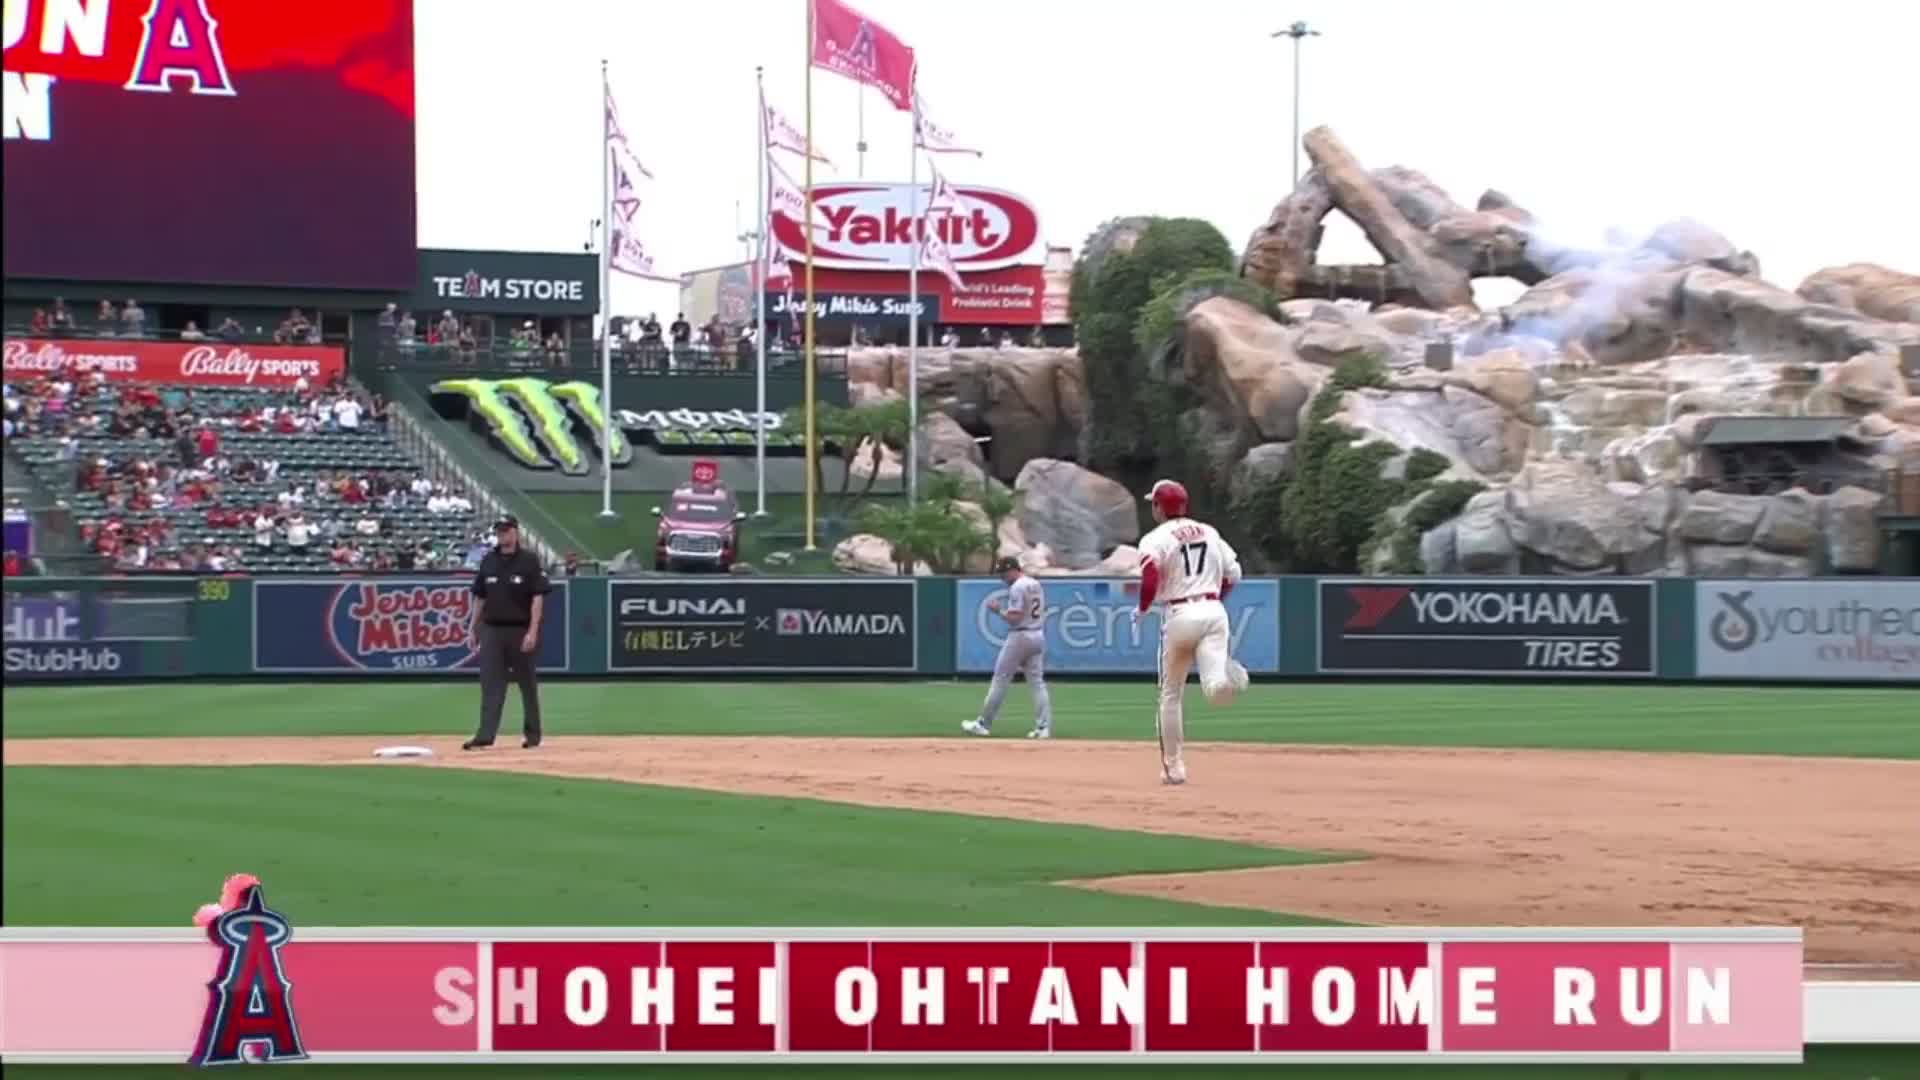 Baseball: Ohtani hits 24th home run, goes back-to-back with Trout